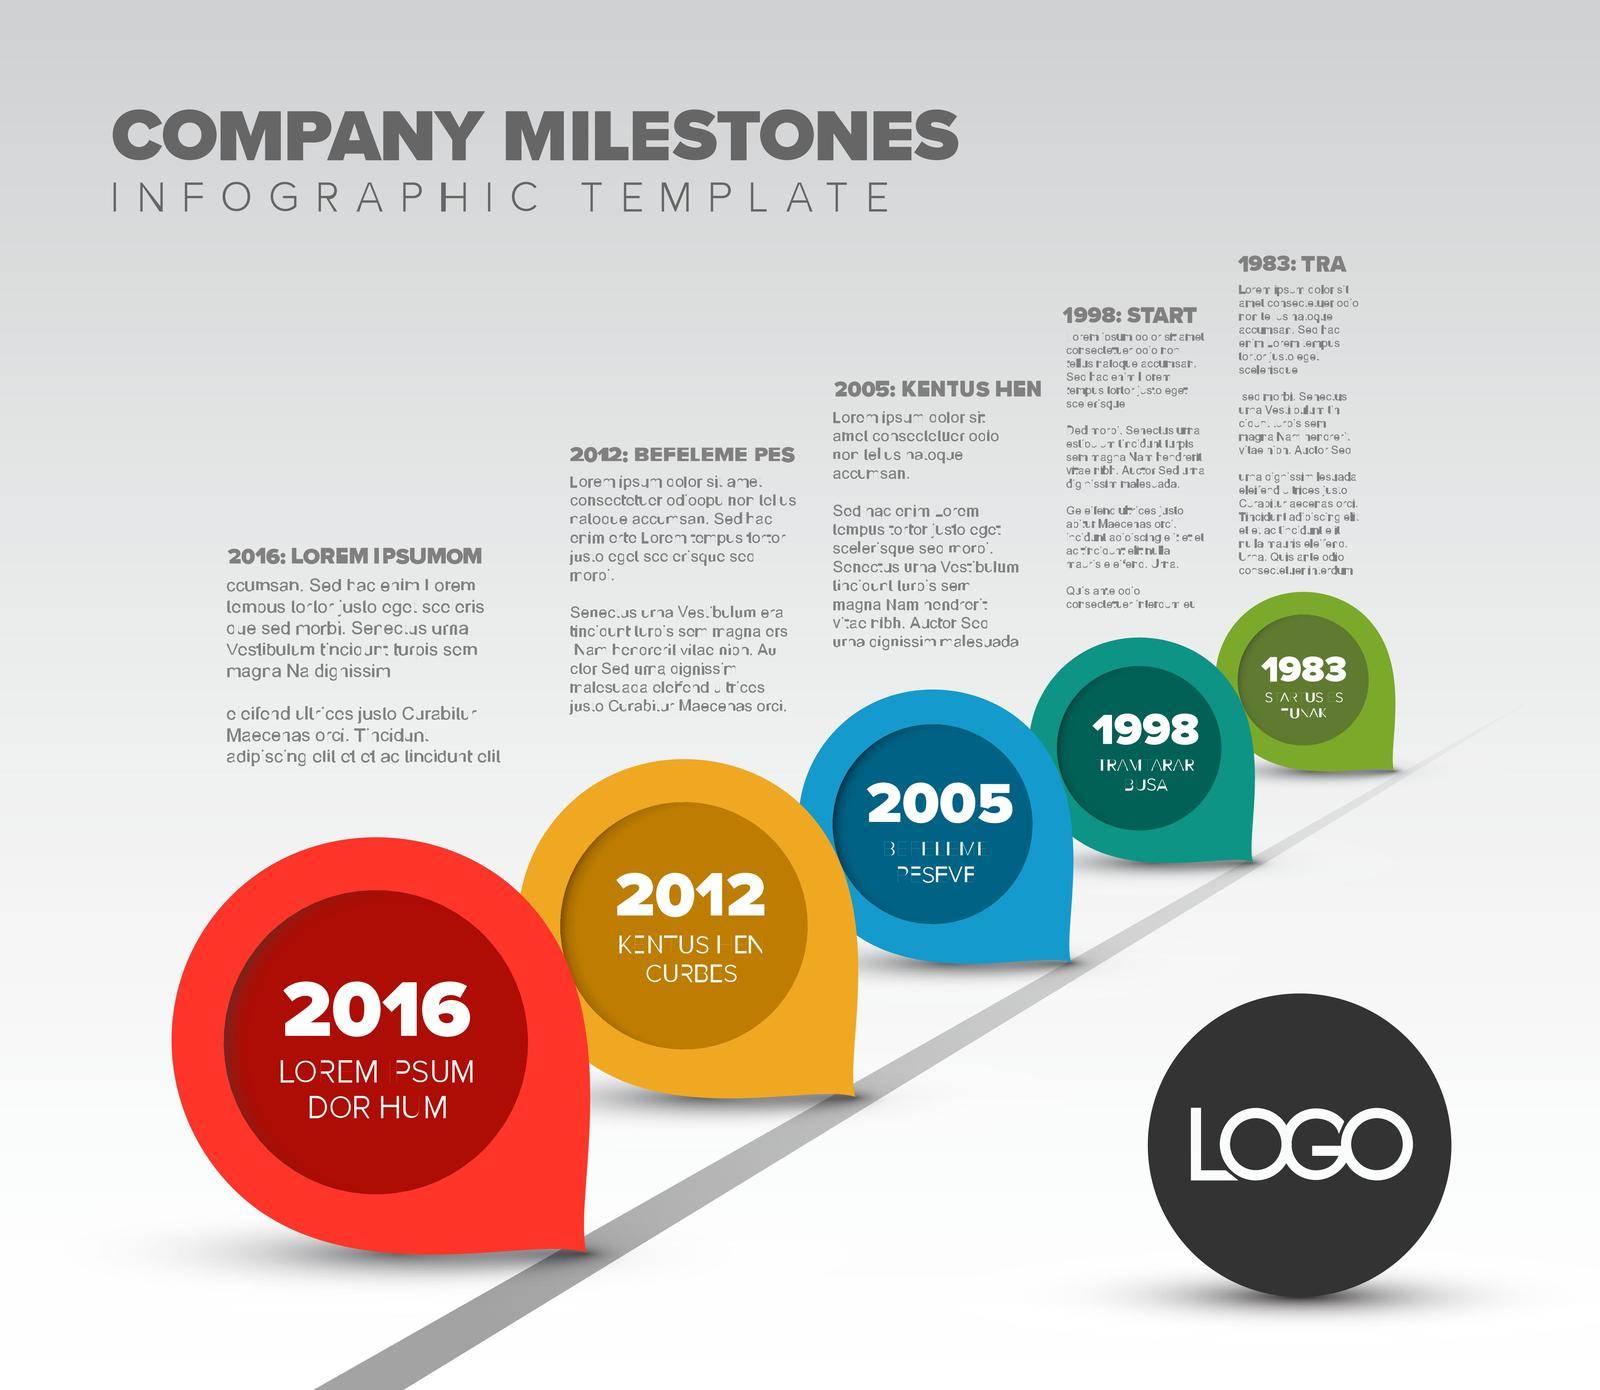 Vector Infographic Company Milestones Timeline Template with pointers on the road